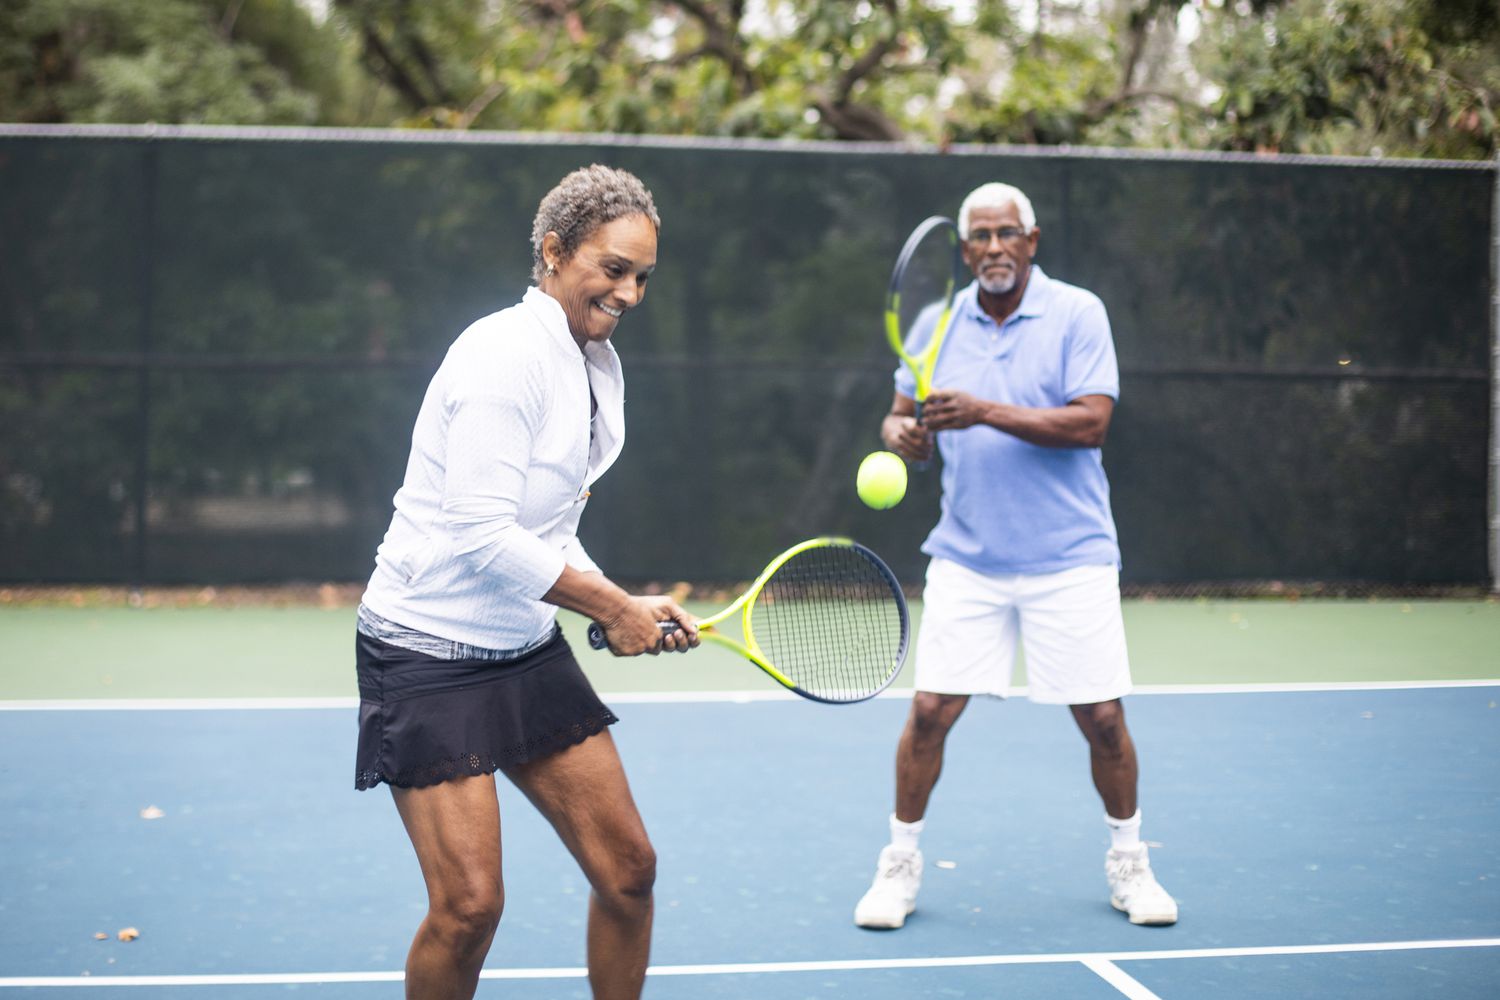 A Senior Black Couple Playing Doubles Tennis on a cloudy morning